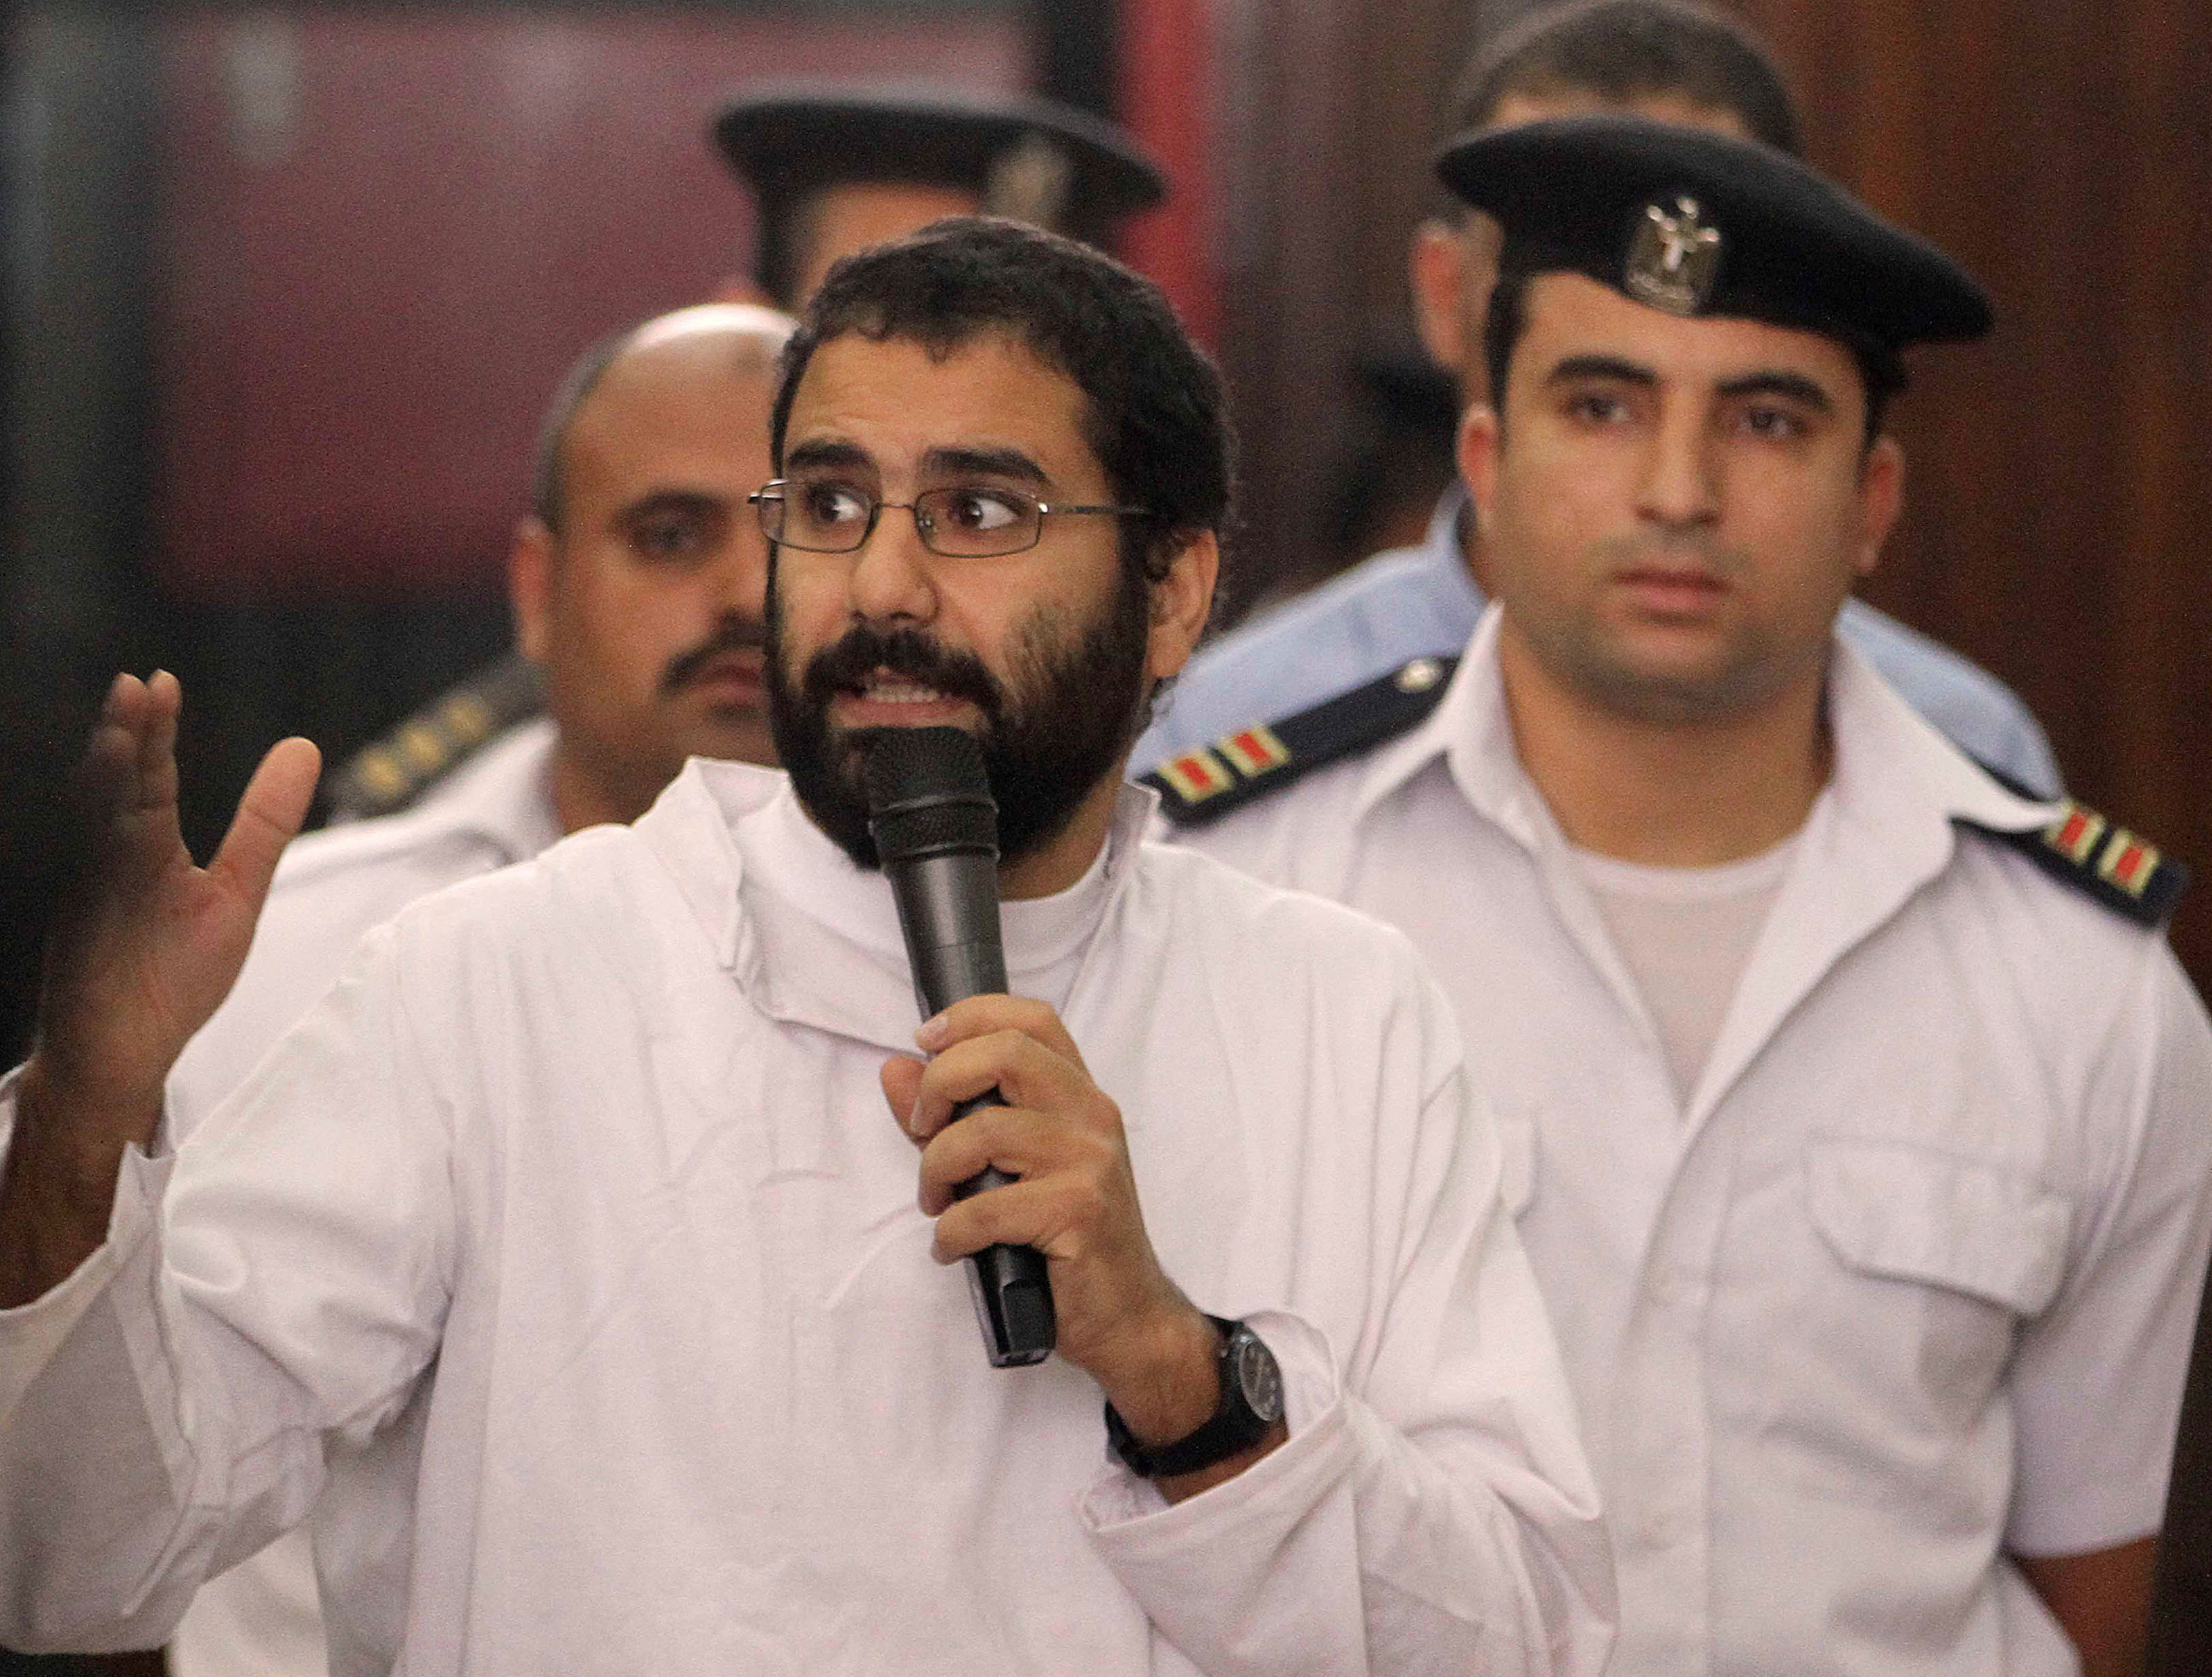 Activist Alaa Abd el-Fattah speaks in front of a judge at a court during his trial in Cairo